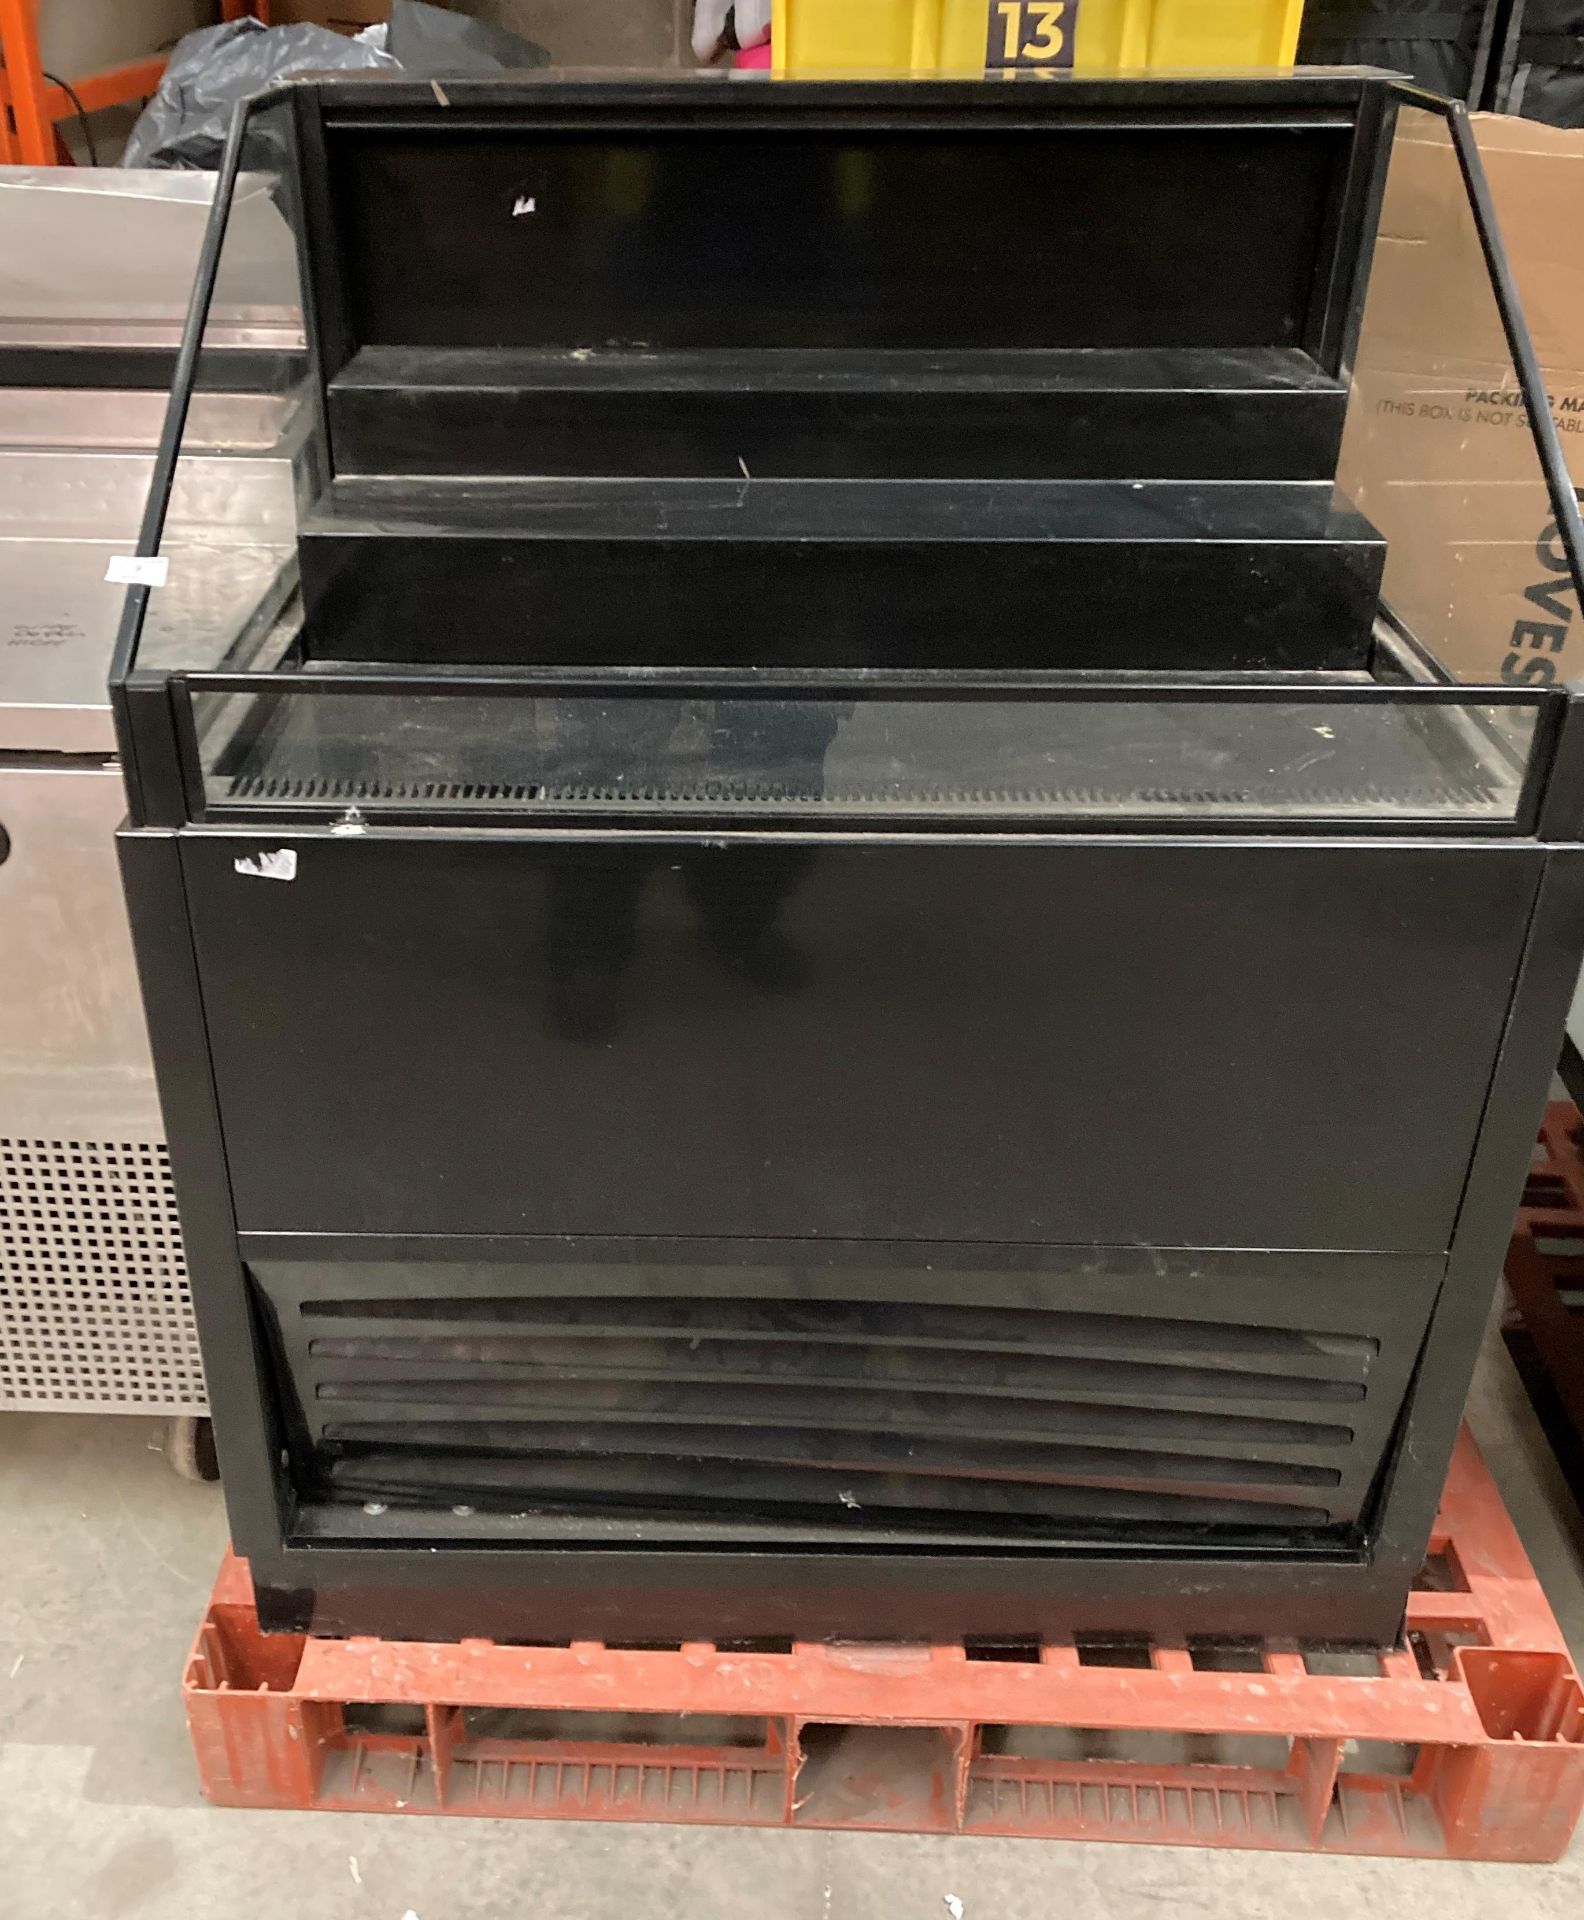 Three tier chiller display cabinet complete with glass sides and front open top in black metal